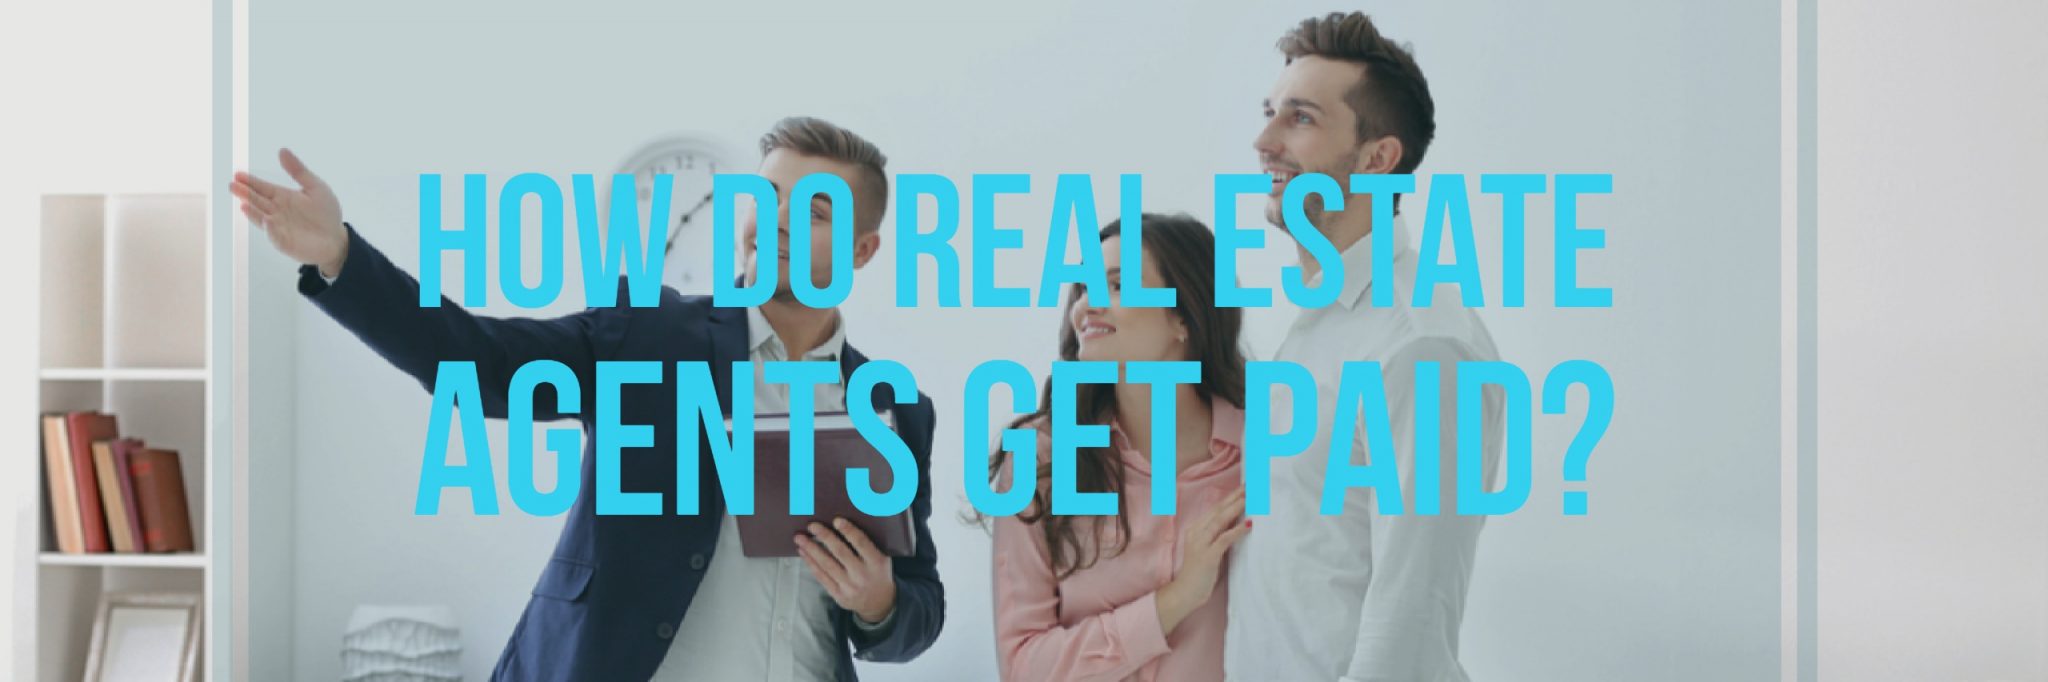 Best real estate company to work for best training for new real estate agents real estate agent coaching real estate agent training best real estate company in Los Angeles (4)